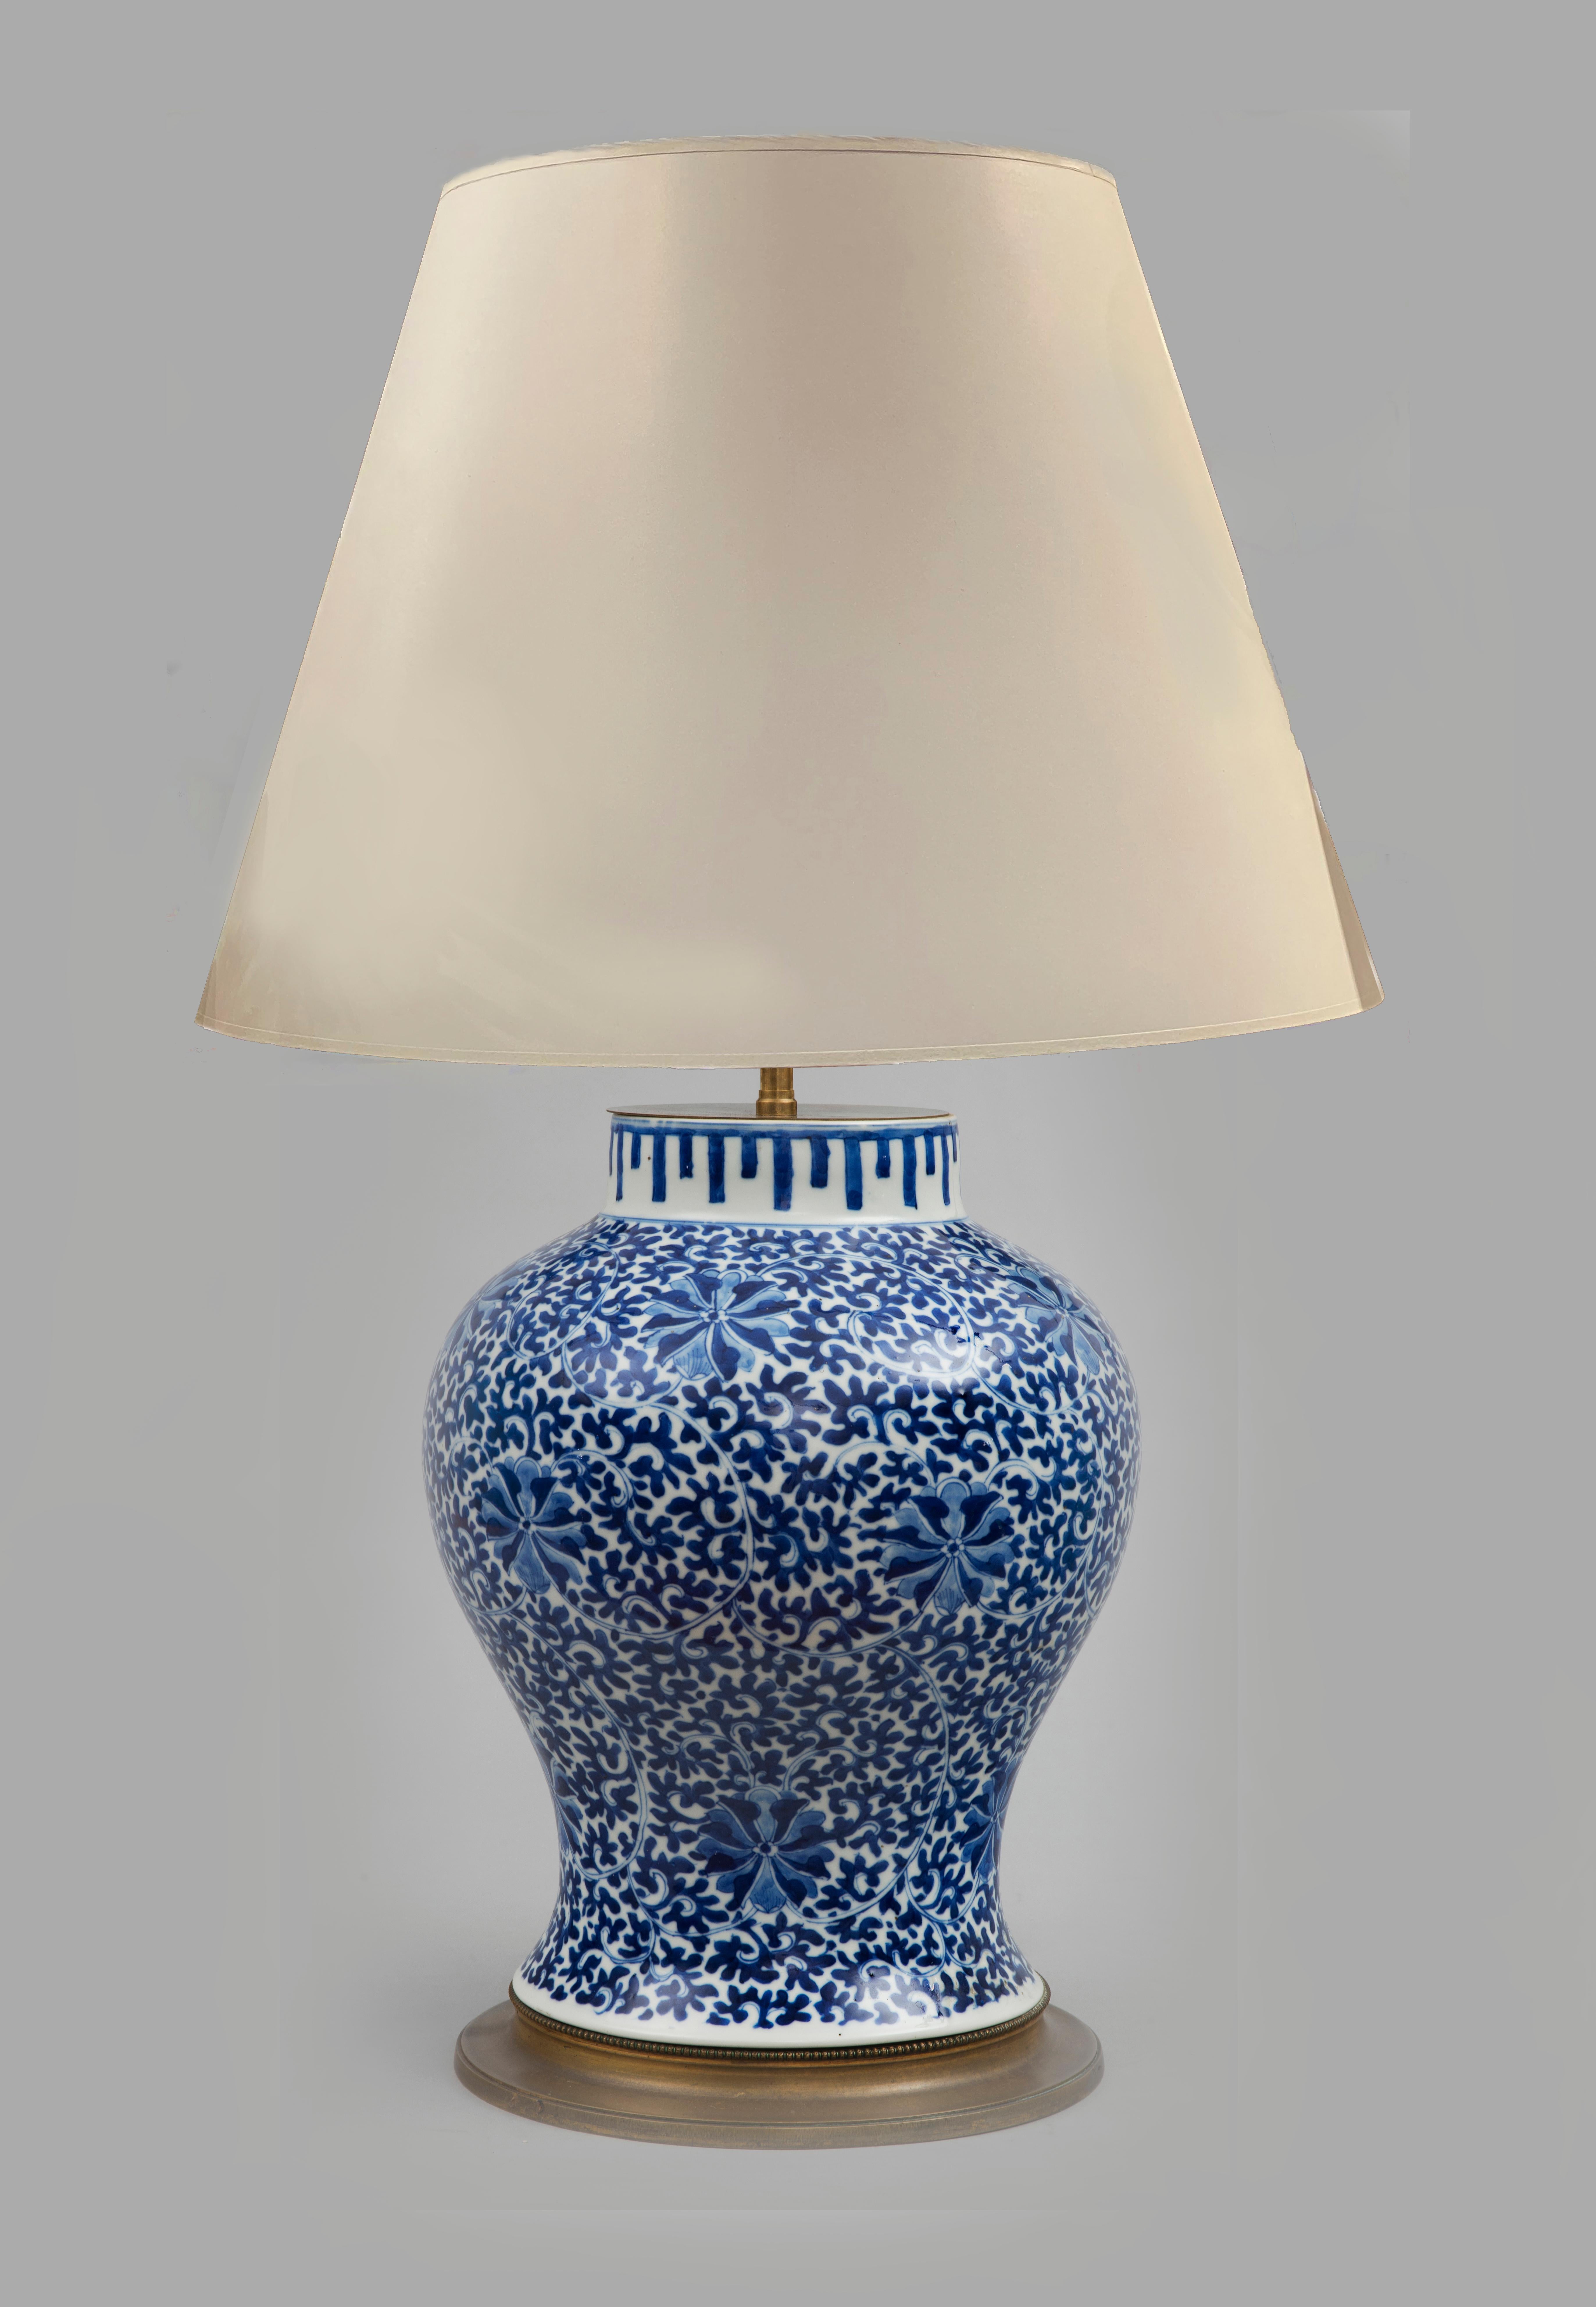 Chinese porcelain blue and white baluster-shaped vase mounted as a lamp, decorated all over with scrolling leaf patterns and stylized flowers, a geometric pattern on the neck, on a brass base, electrified. It has a white paper shade.